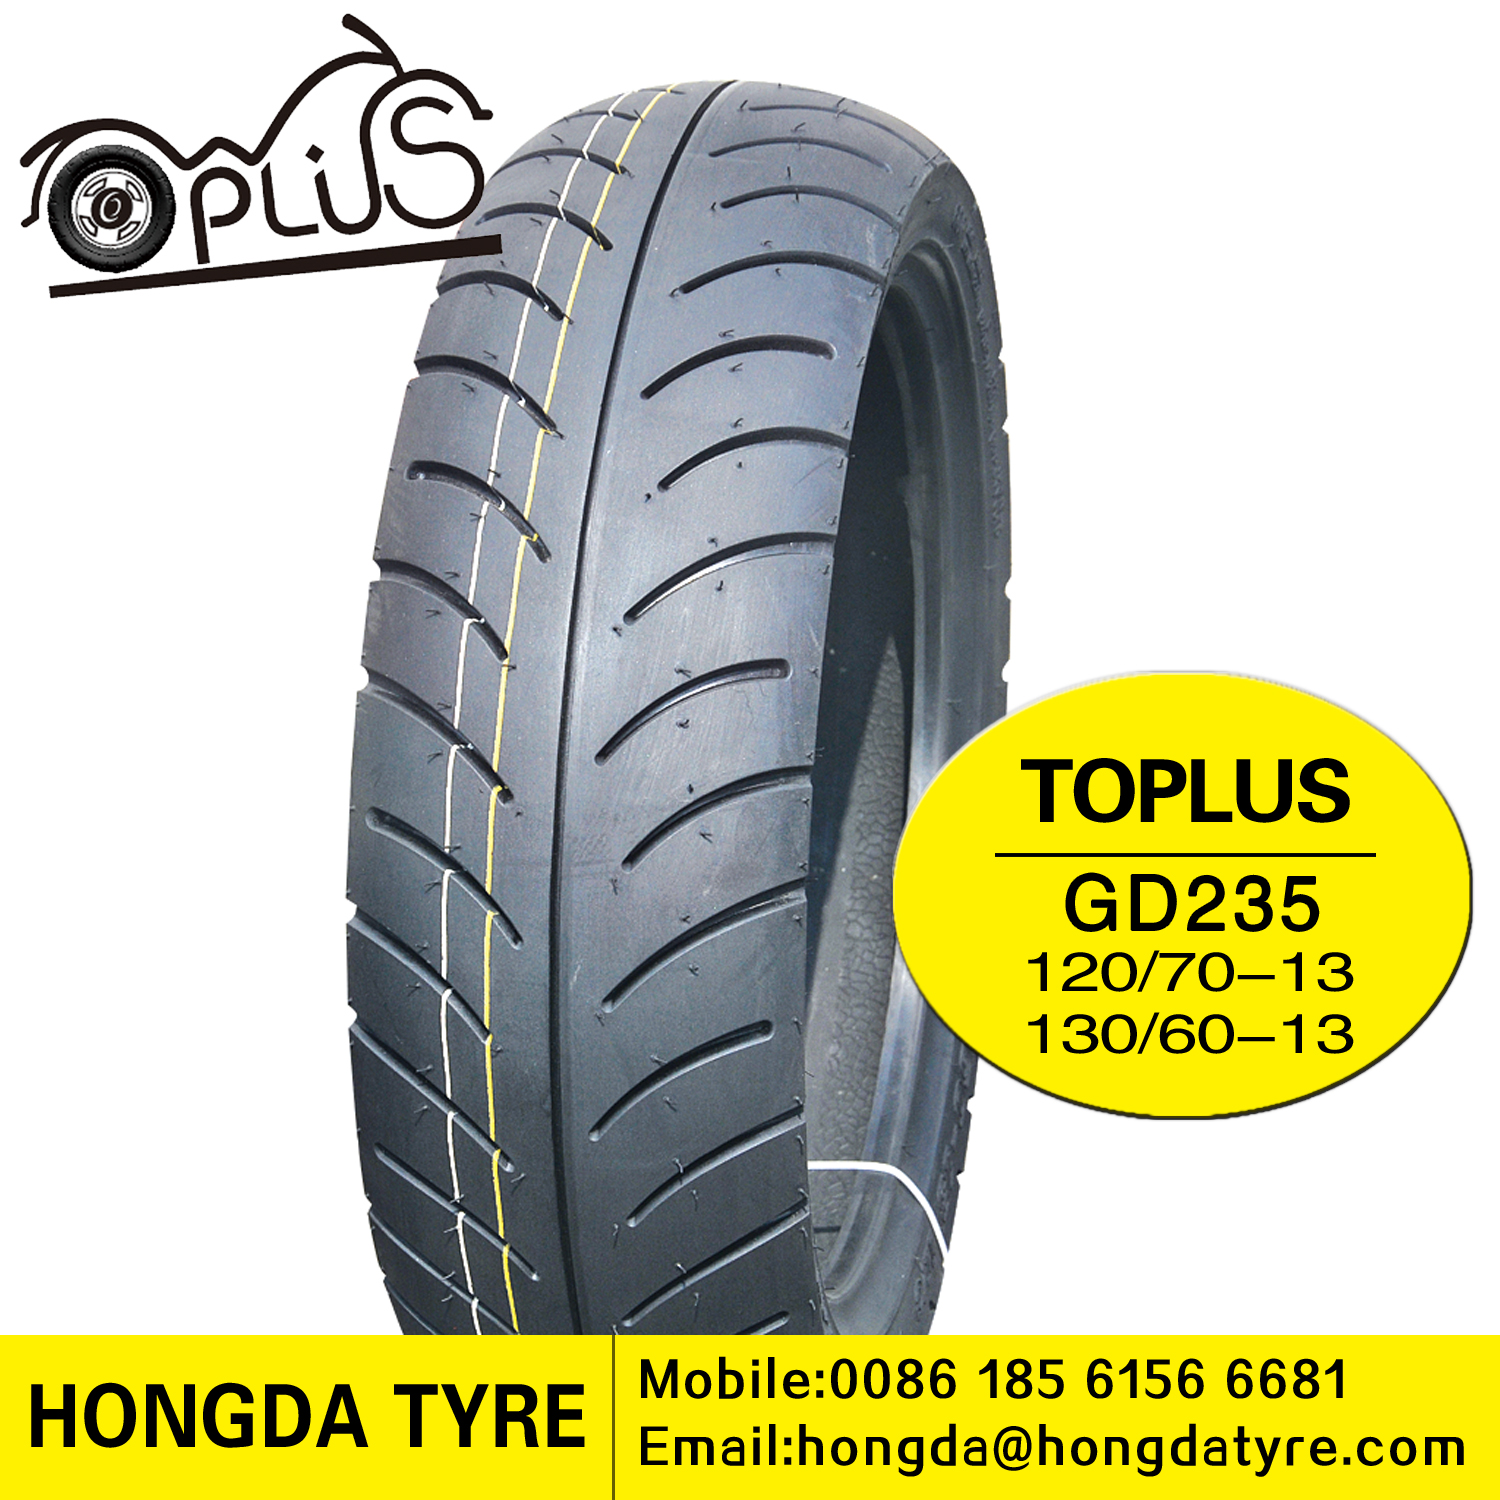 Motorcycle tyre GD235